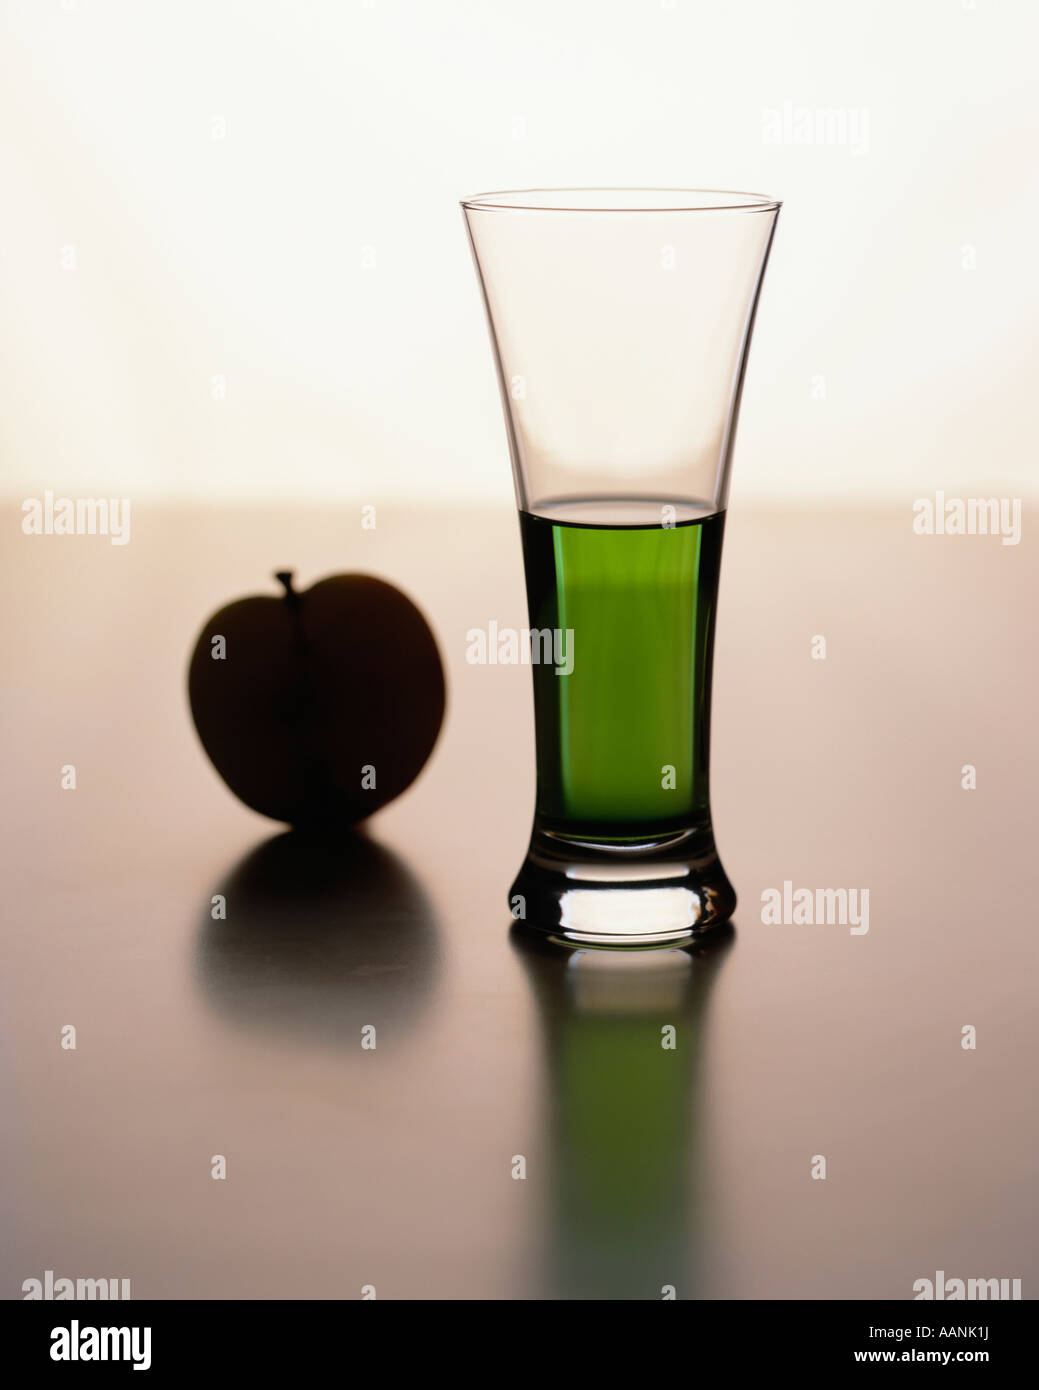 Glass of green drink with apple on plain background Stock Photo